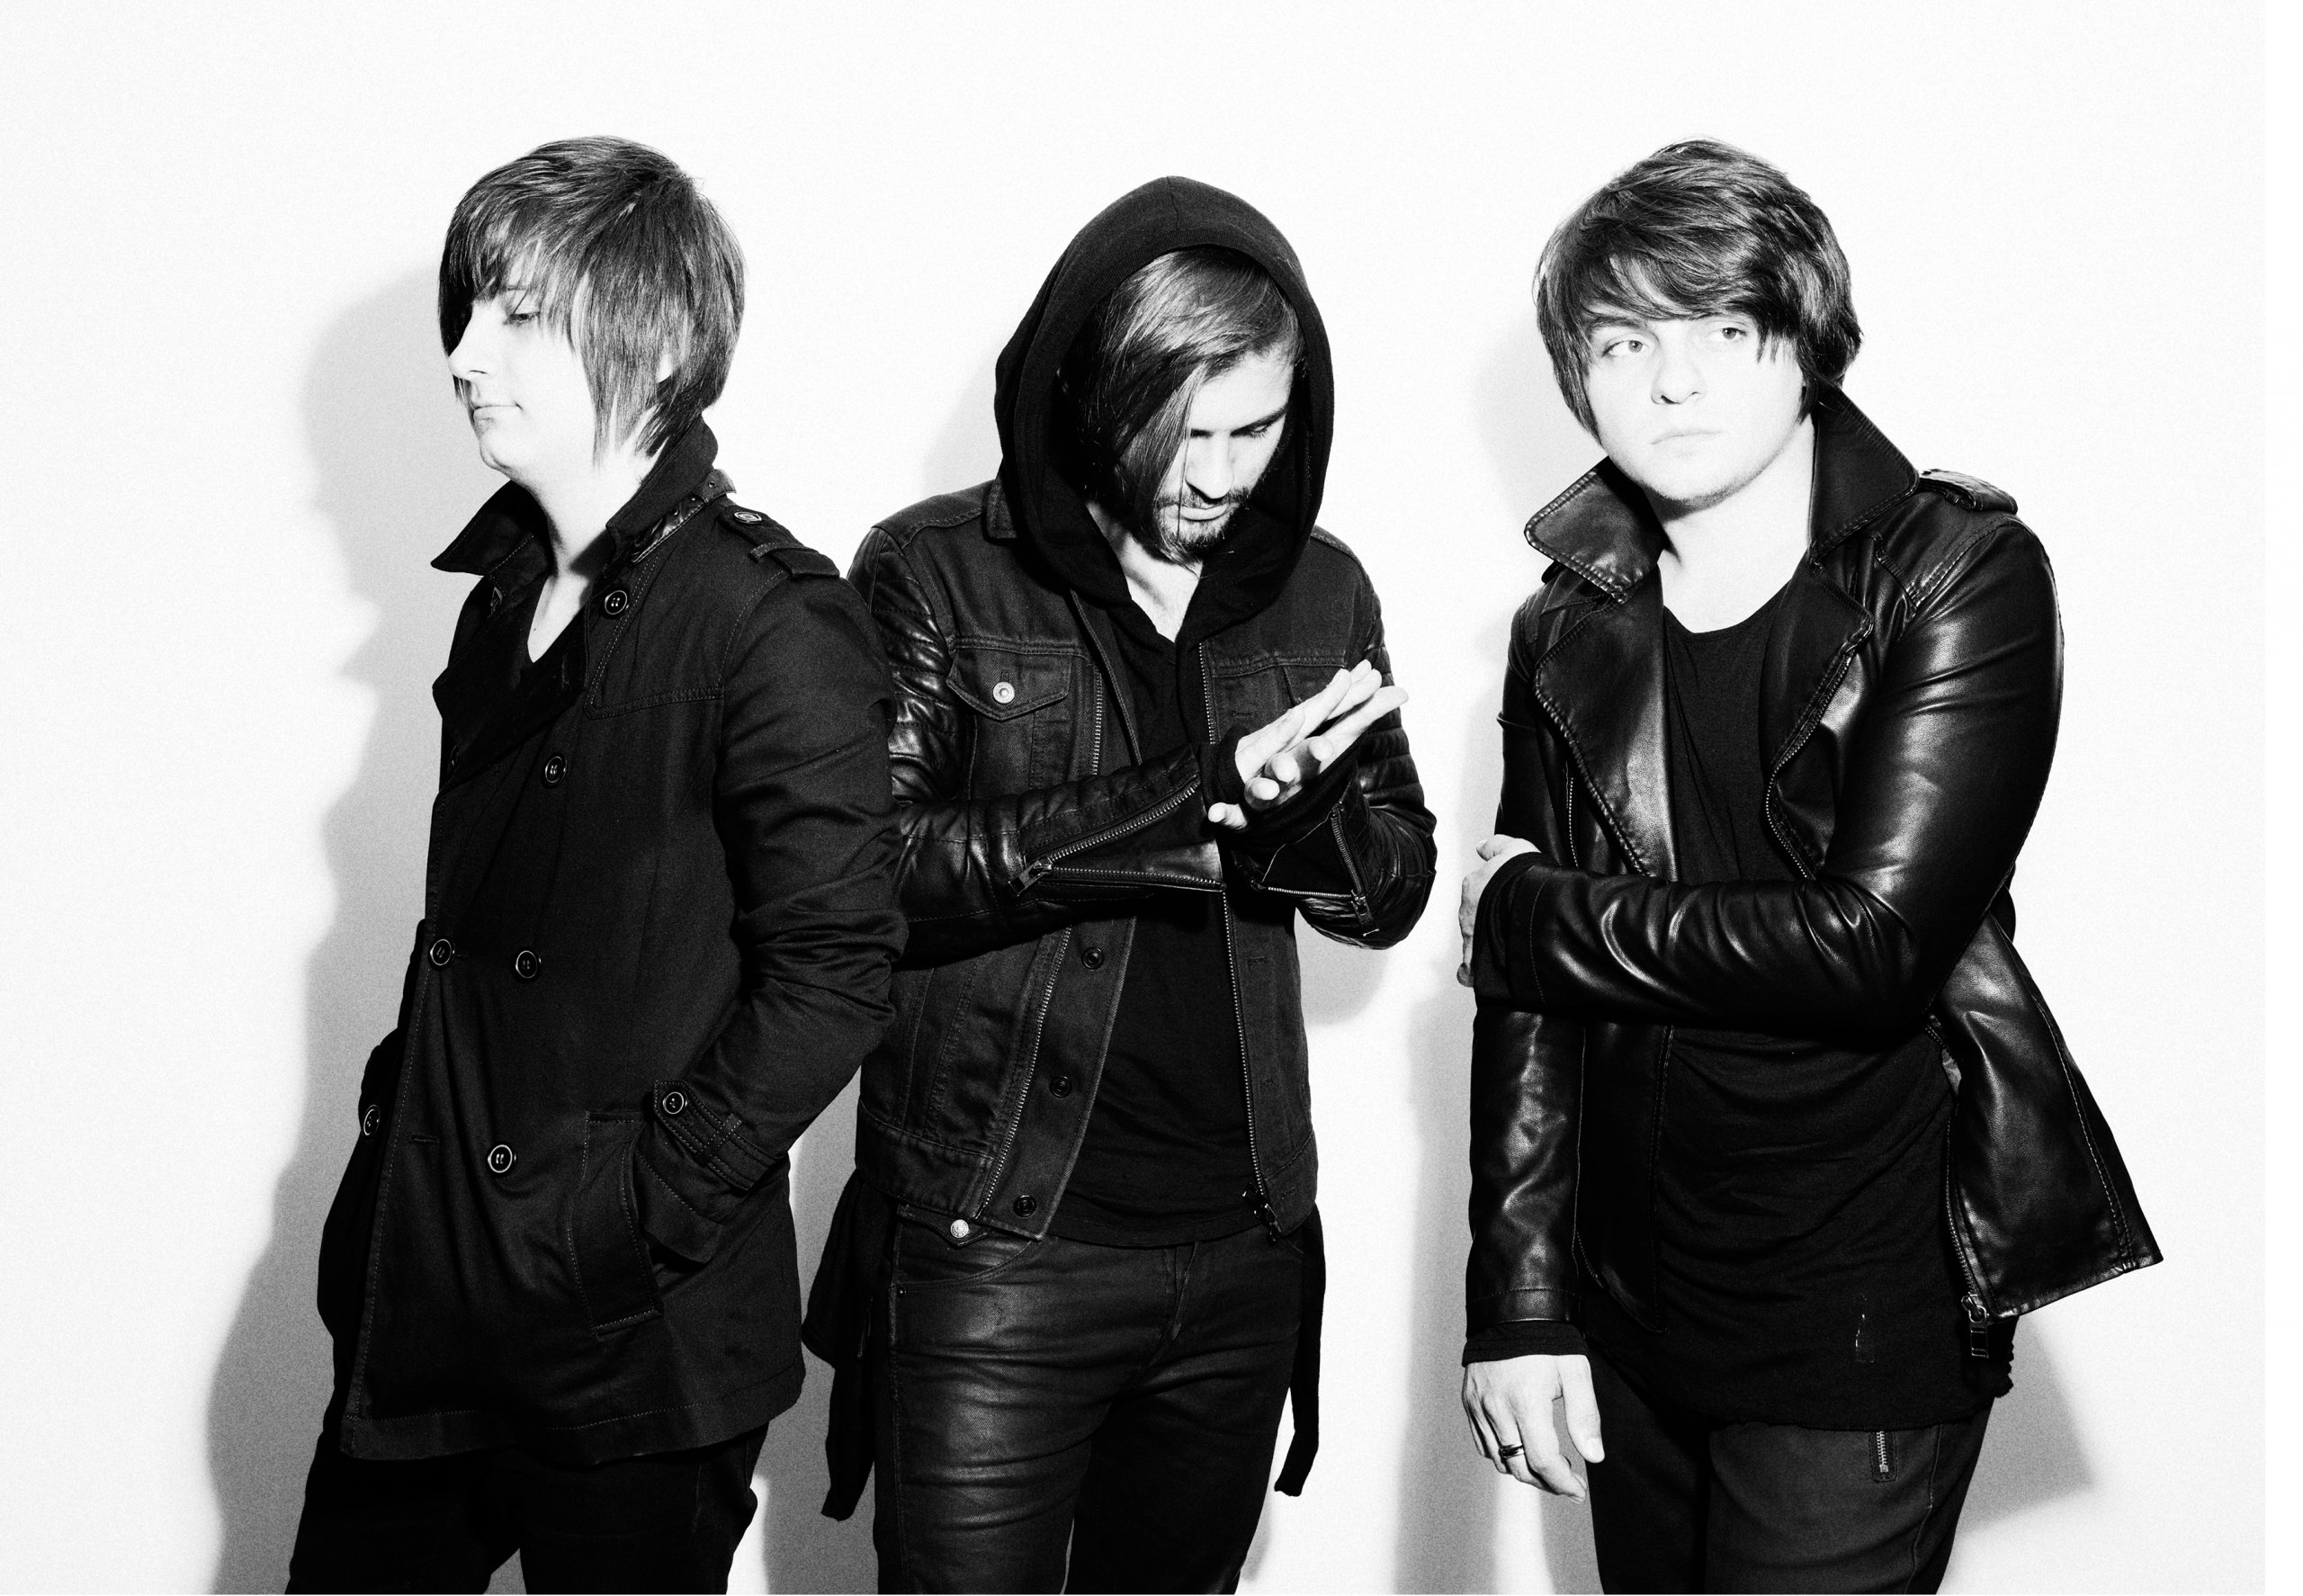 Everfound band photo